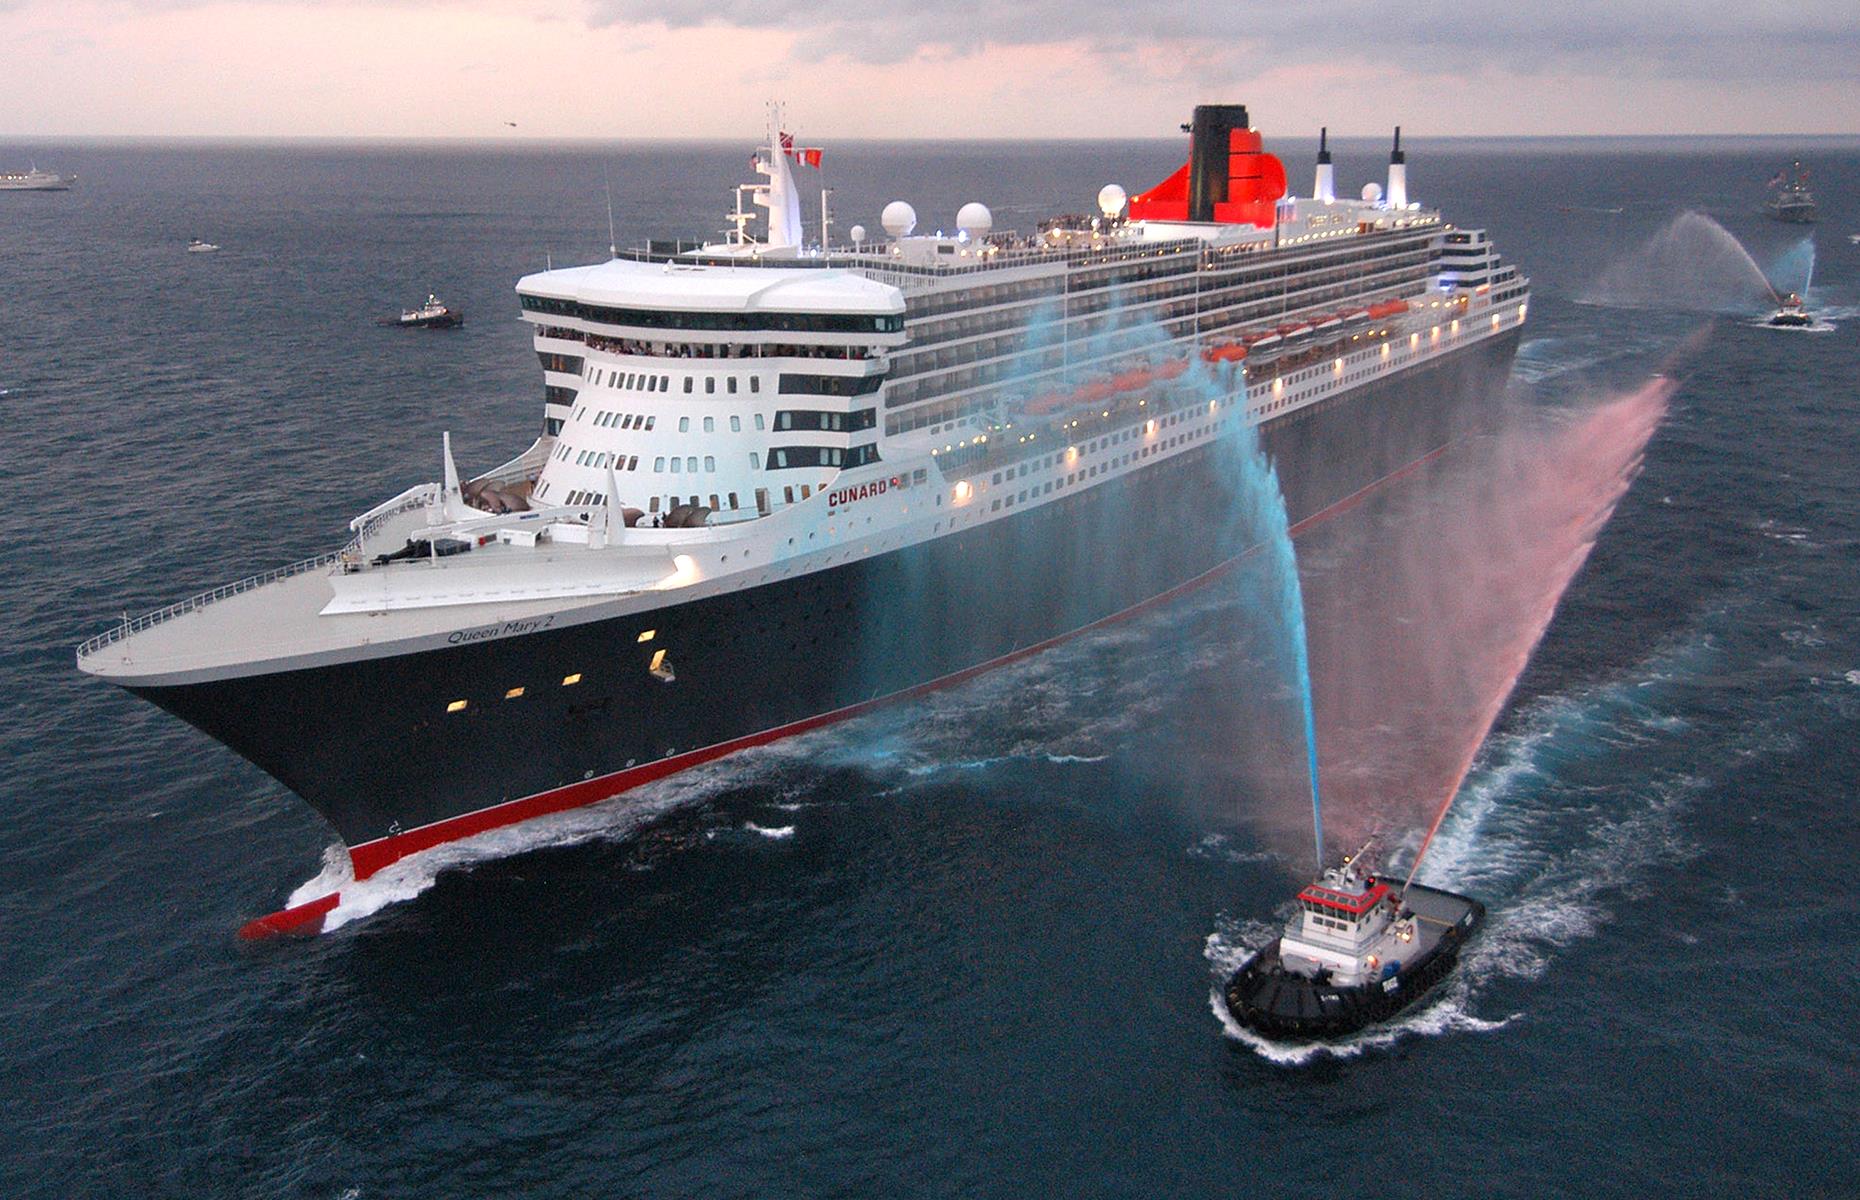 <p>Fast-forward to the 2000s and the larger-than-life, no-expense-spared, mega cruise ships we're used to seeing today were sailing onto the scene. This sunset snap shows Cunard Line's Queen Mary II as she completes her first trans-Atlantic voyage in January 2004. At this time, she was the largest and most expensive cruise ship ever constructed with room for 2,200-plus passengers, a theater and even a planetarium, setting the bar for the ships of posterity. </p>  <p><a href="https://www.loveexploring.com/gallerylist/81720/from-mayflower-to-titanic-the-worlds-most-historic-ships-you-can-visit"><strong>If this has floated your boat, here's where to see the world's most famous ships</strong></a></p>